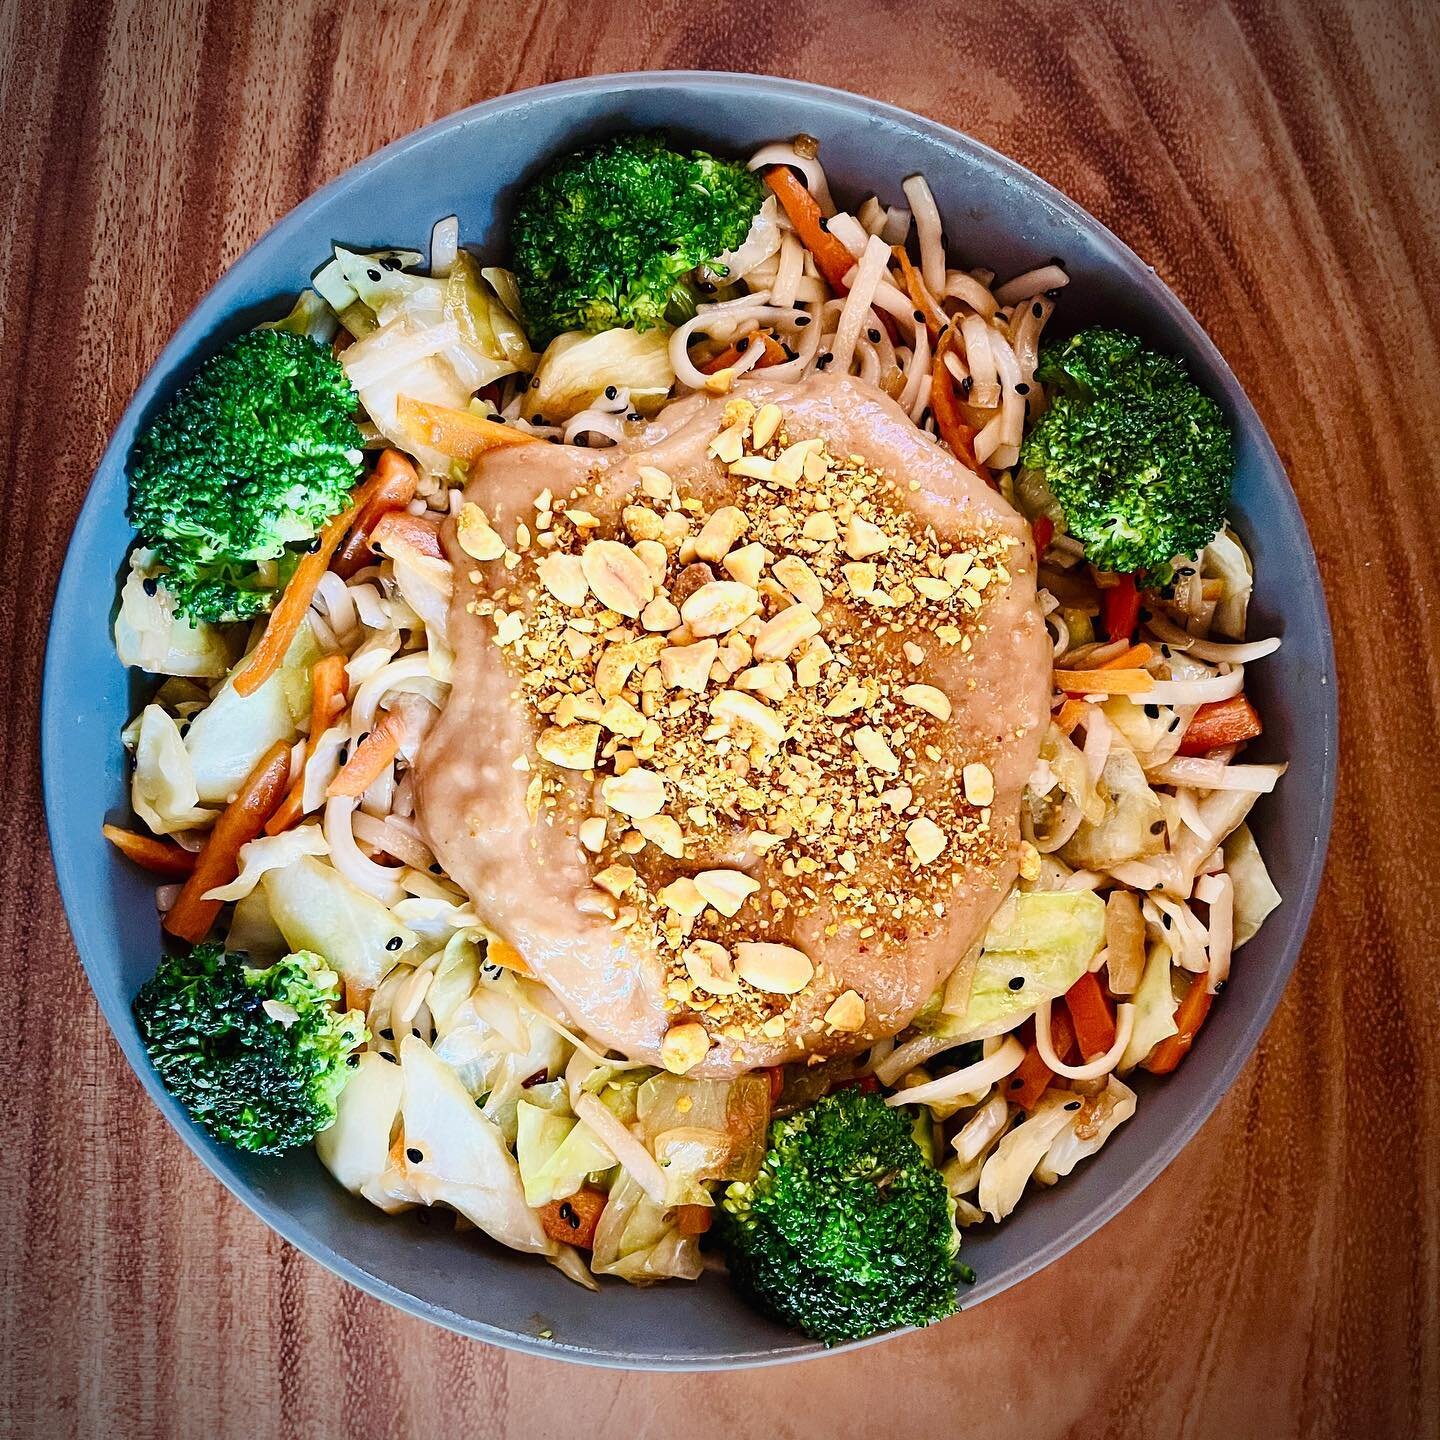 Buddha Bowl: Rice Noodles, Broccoli, Carrot, Cabbage and our homemade Peanut Sauce. Yum! 💚💜 #buddhabowl #yum